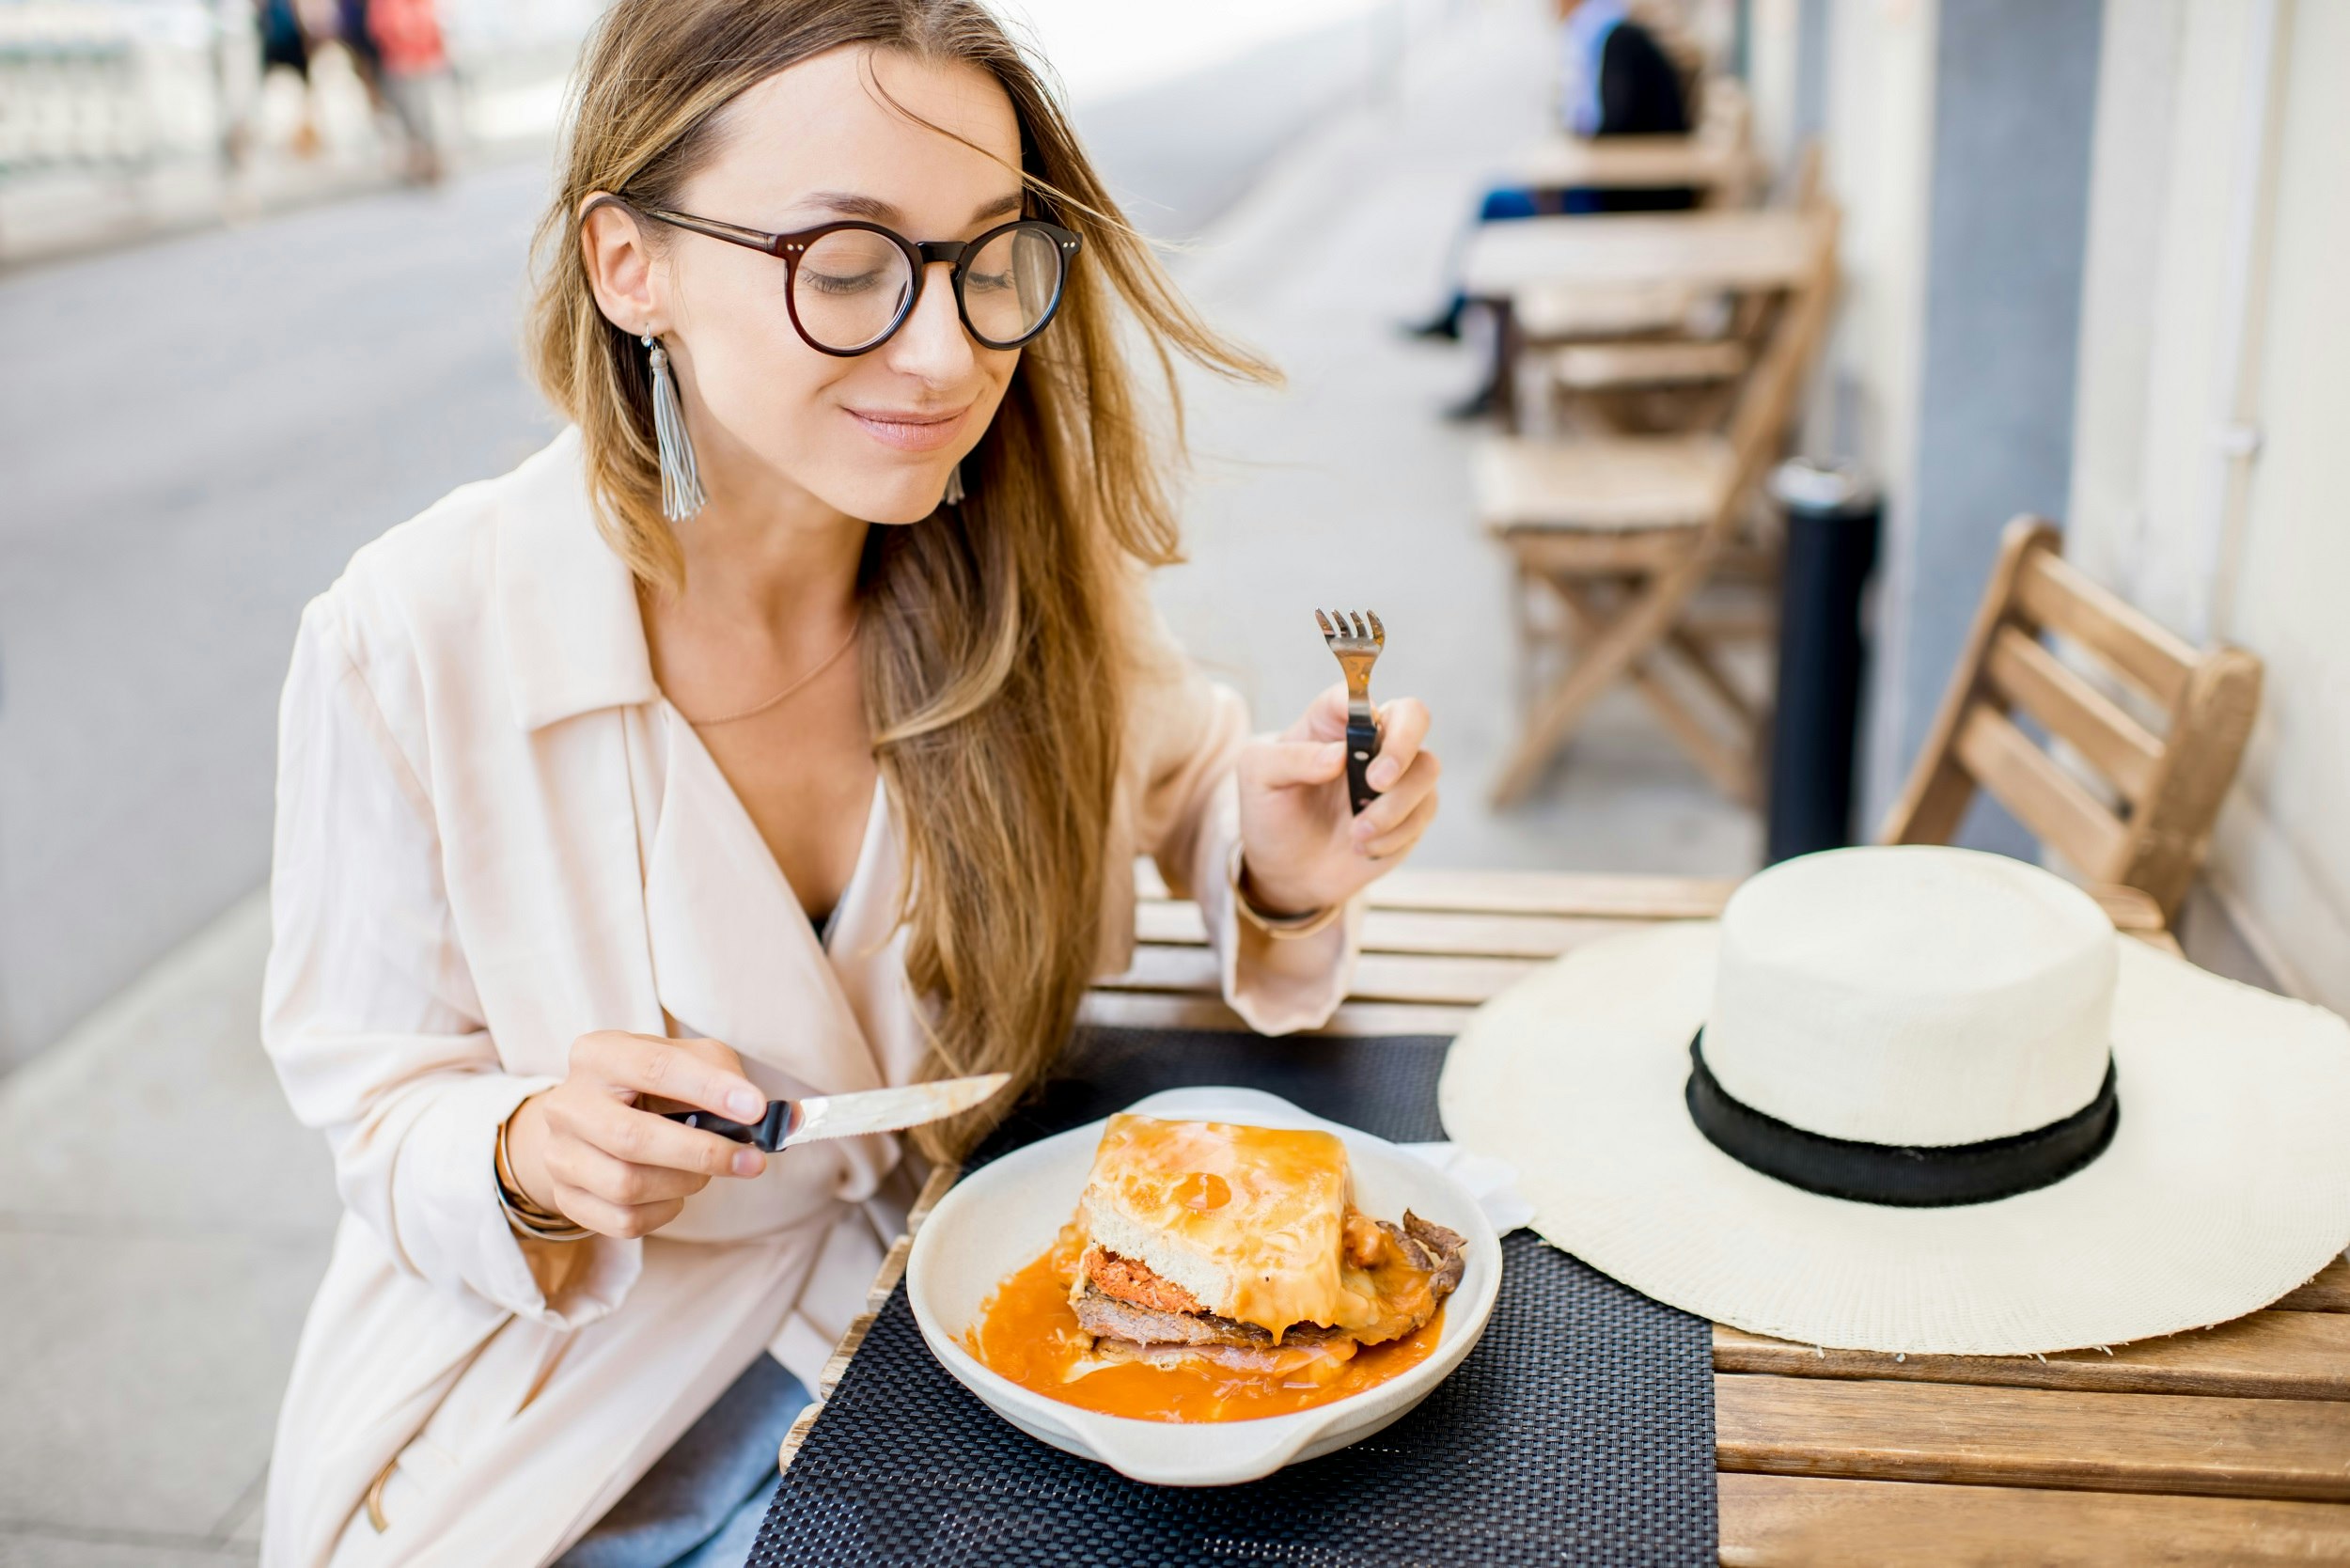 A woman with a full mouth, and wearing glasses, holds a knife and fork while gazing down at a large francesinha sandwich; it's topped with an egg and thick tomato sauce